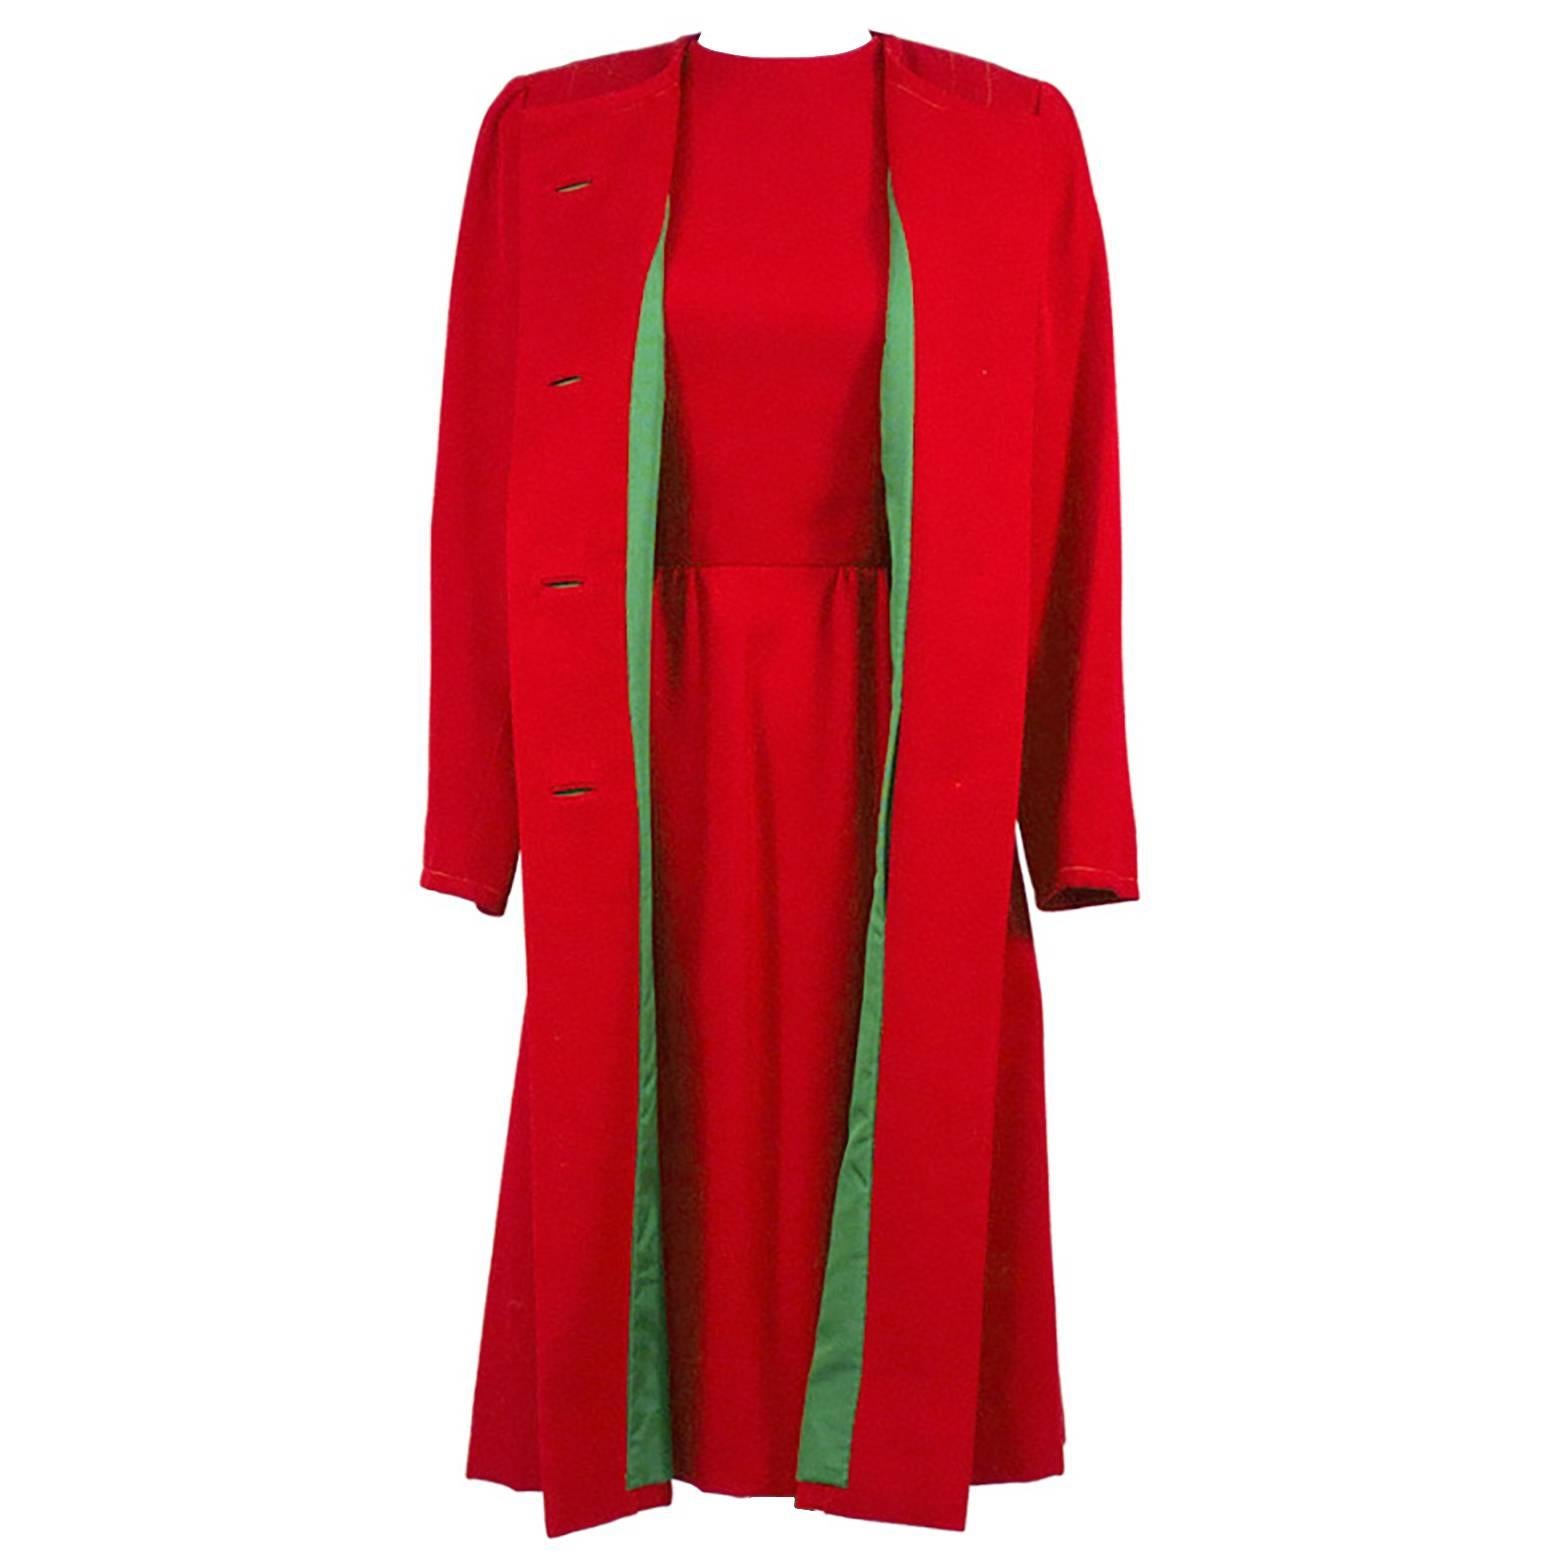 1950s Vintage Sheath Dress And Coat Suit Red Green Christmas Holiday Ensemble